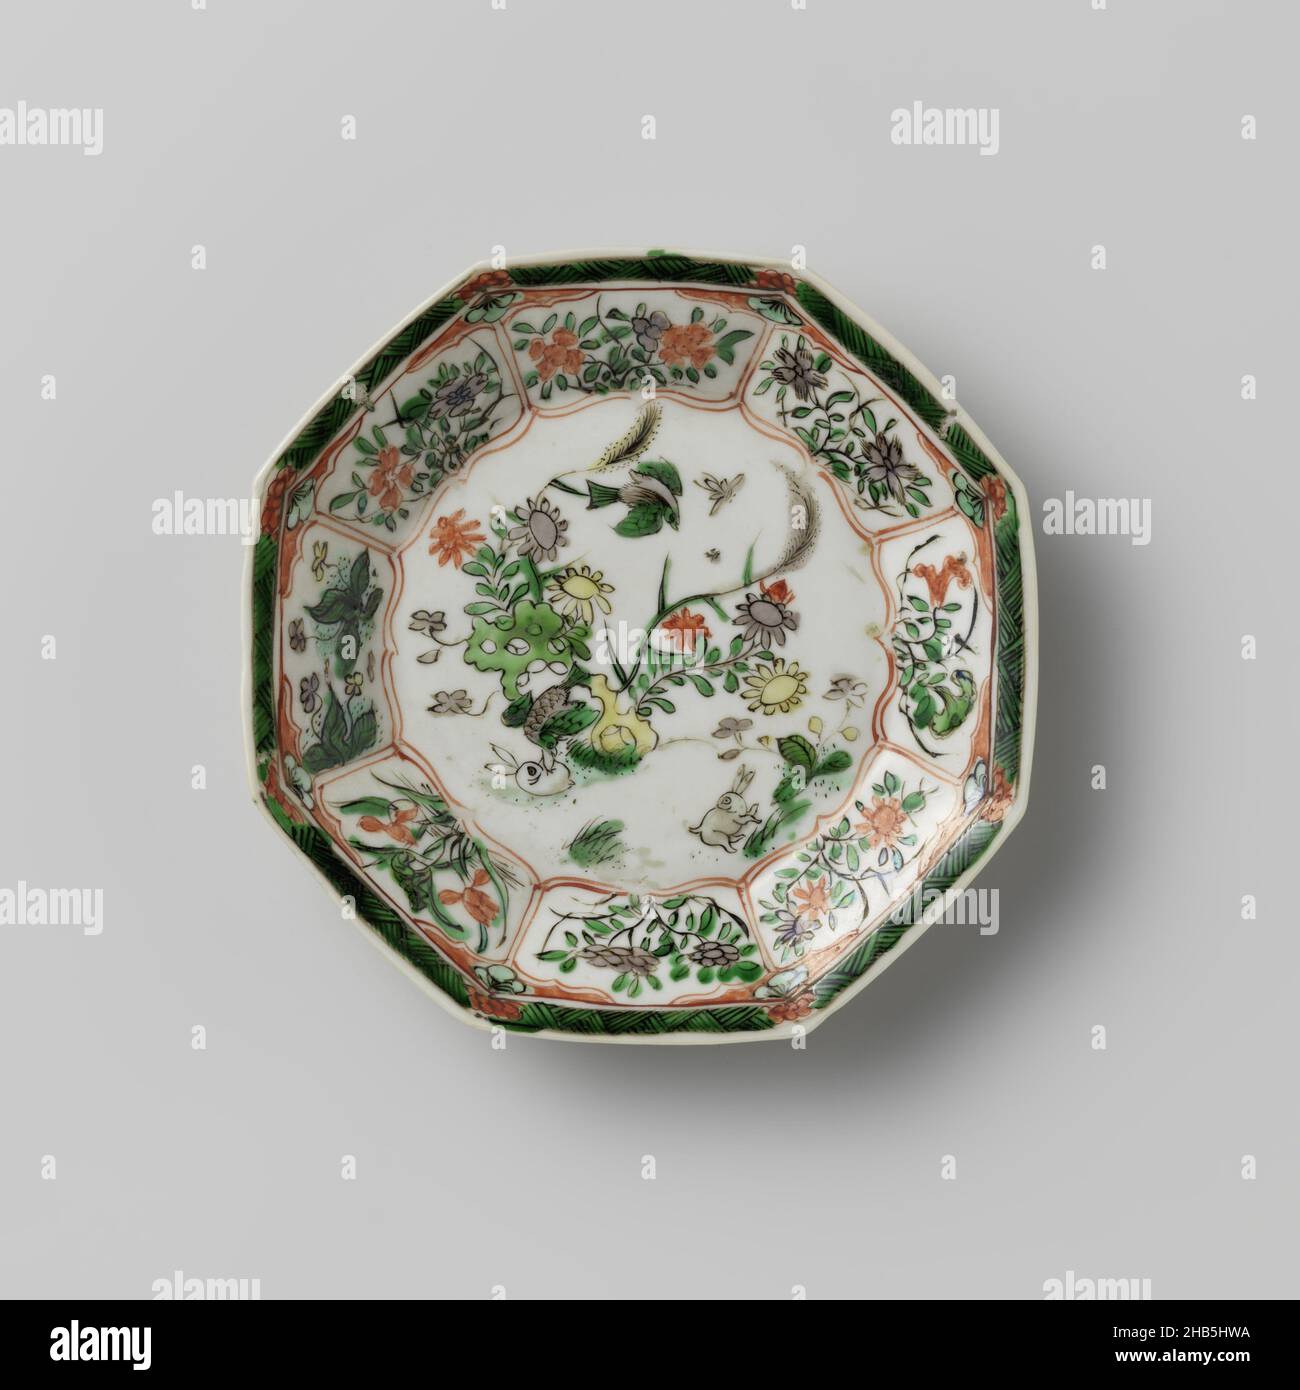 Octagonal saucer with light brown, animals and flower sprays, Octagonal saucer of porcelain, partially covered with café-au-lait, painted in underglaze blue and on the glaze red, green, yellow, eggplant and black. On the flat, two hares and two birds near a rock with flowering plants; the wall with flower branches and butterflies in a box decoration; the rim with zigzag work alternating with flowers. The exterior is covered with a café-au-lait glaze with flower branches. Marked on the underside with a character in a double circle. Famille verte with monochrome brown glaze., anonymous, China, c Stock Photo